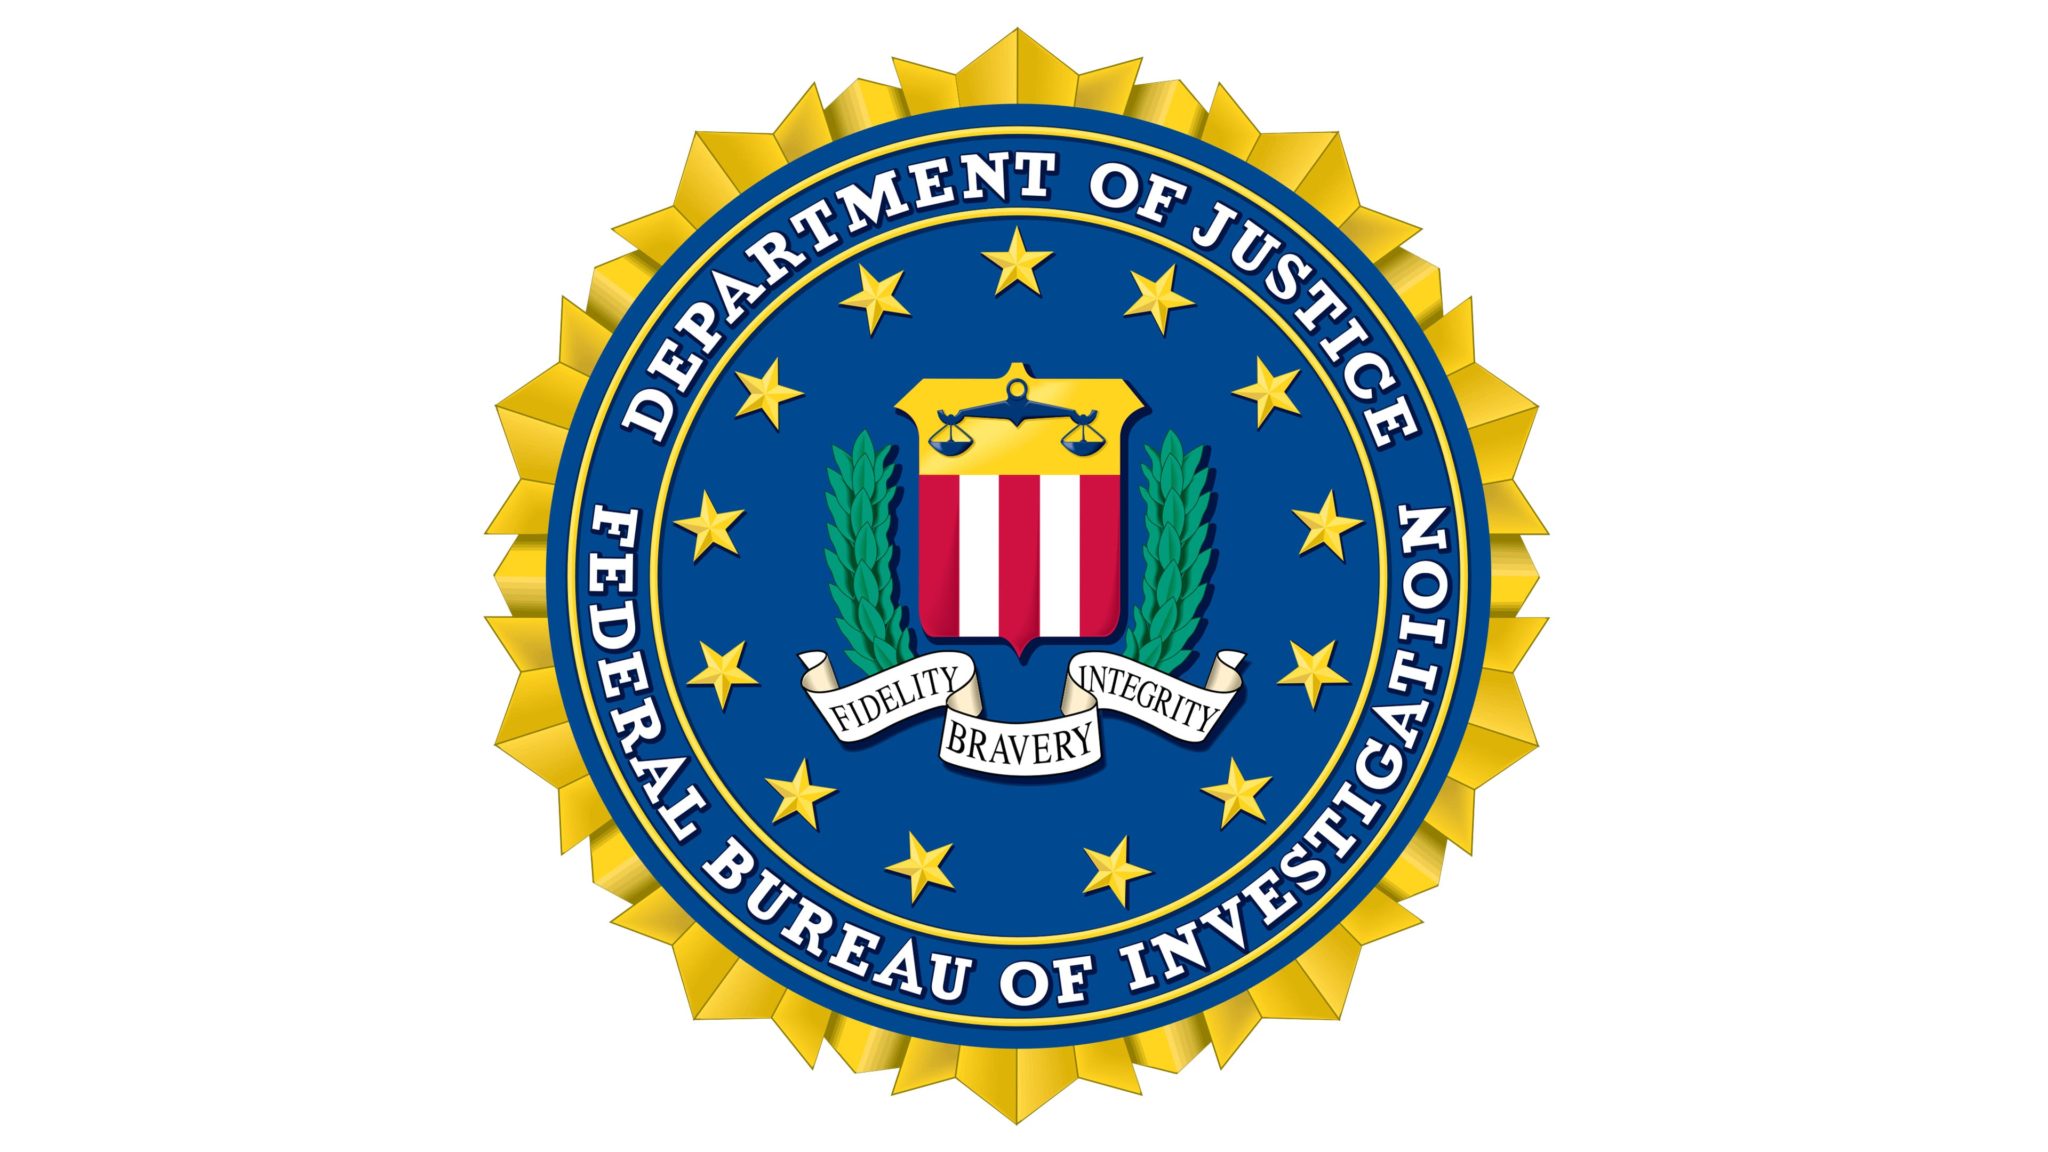 Official seal for the Federal Bureau of Investigation (FBI)